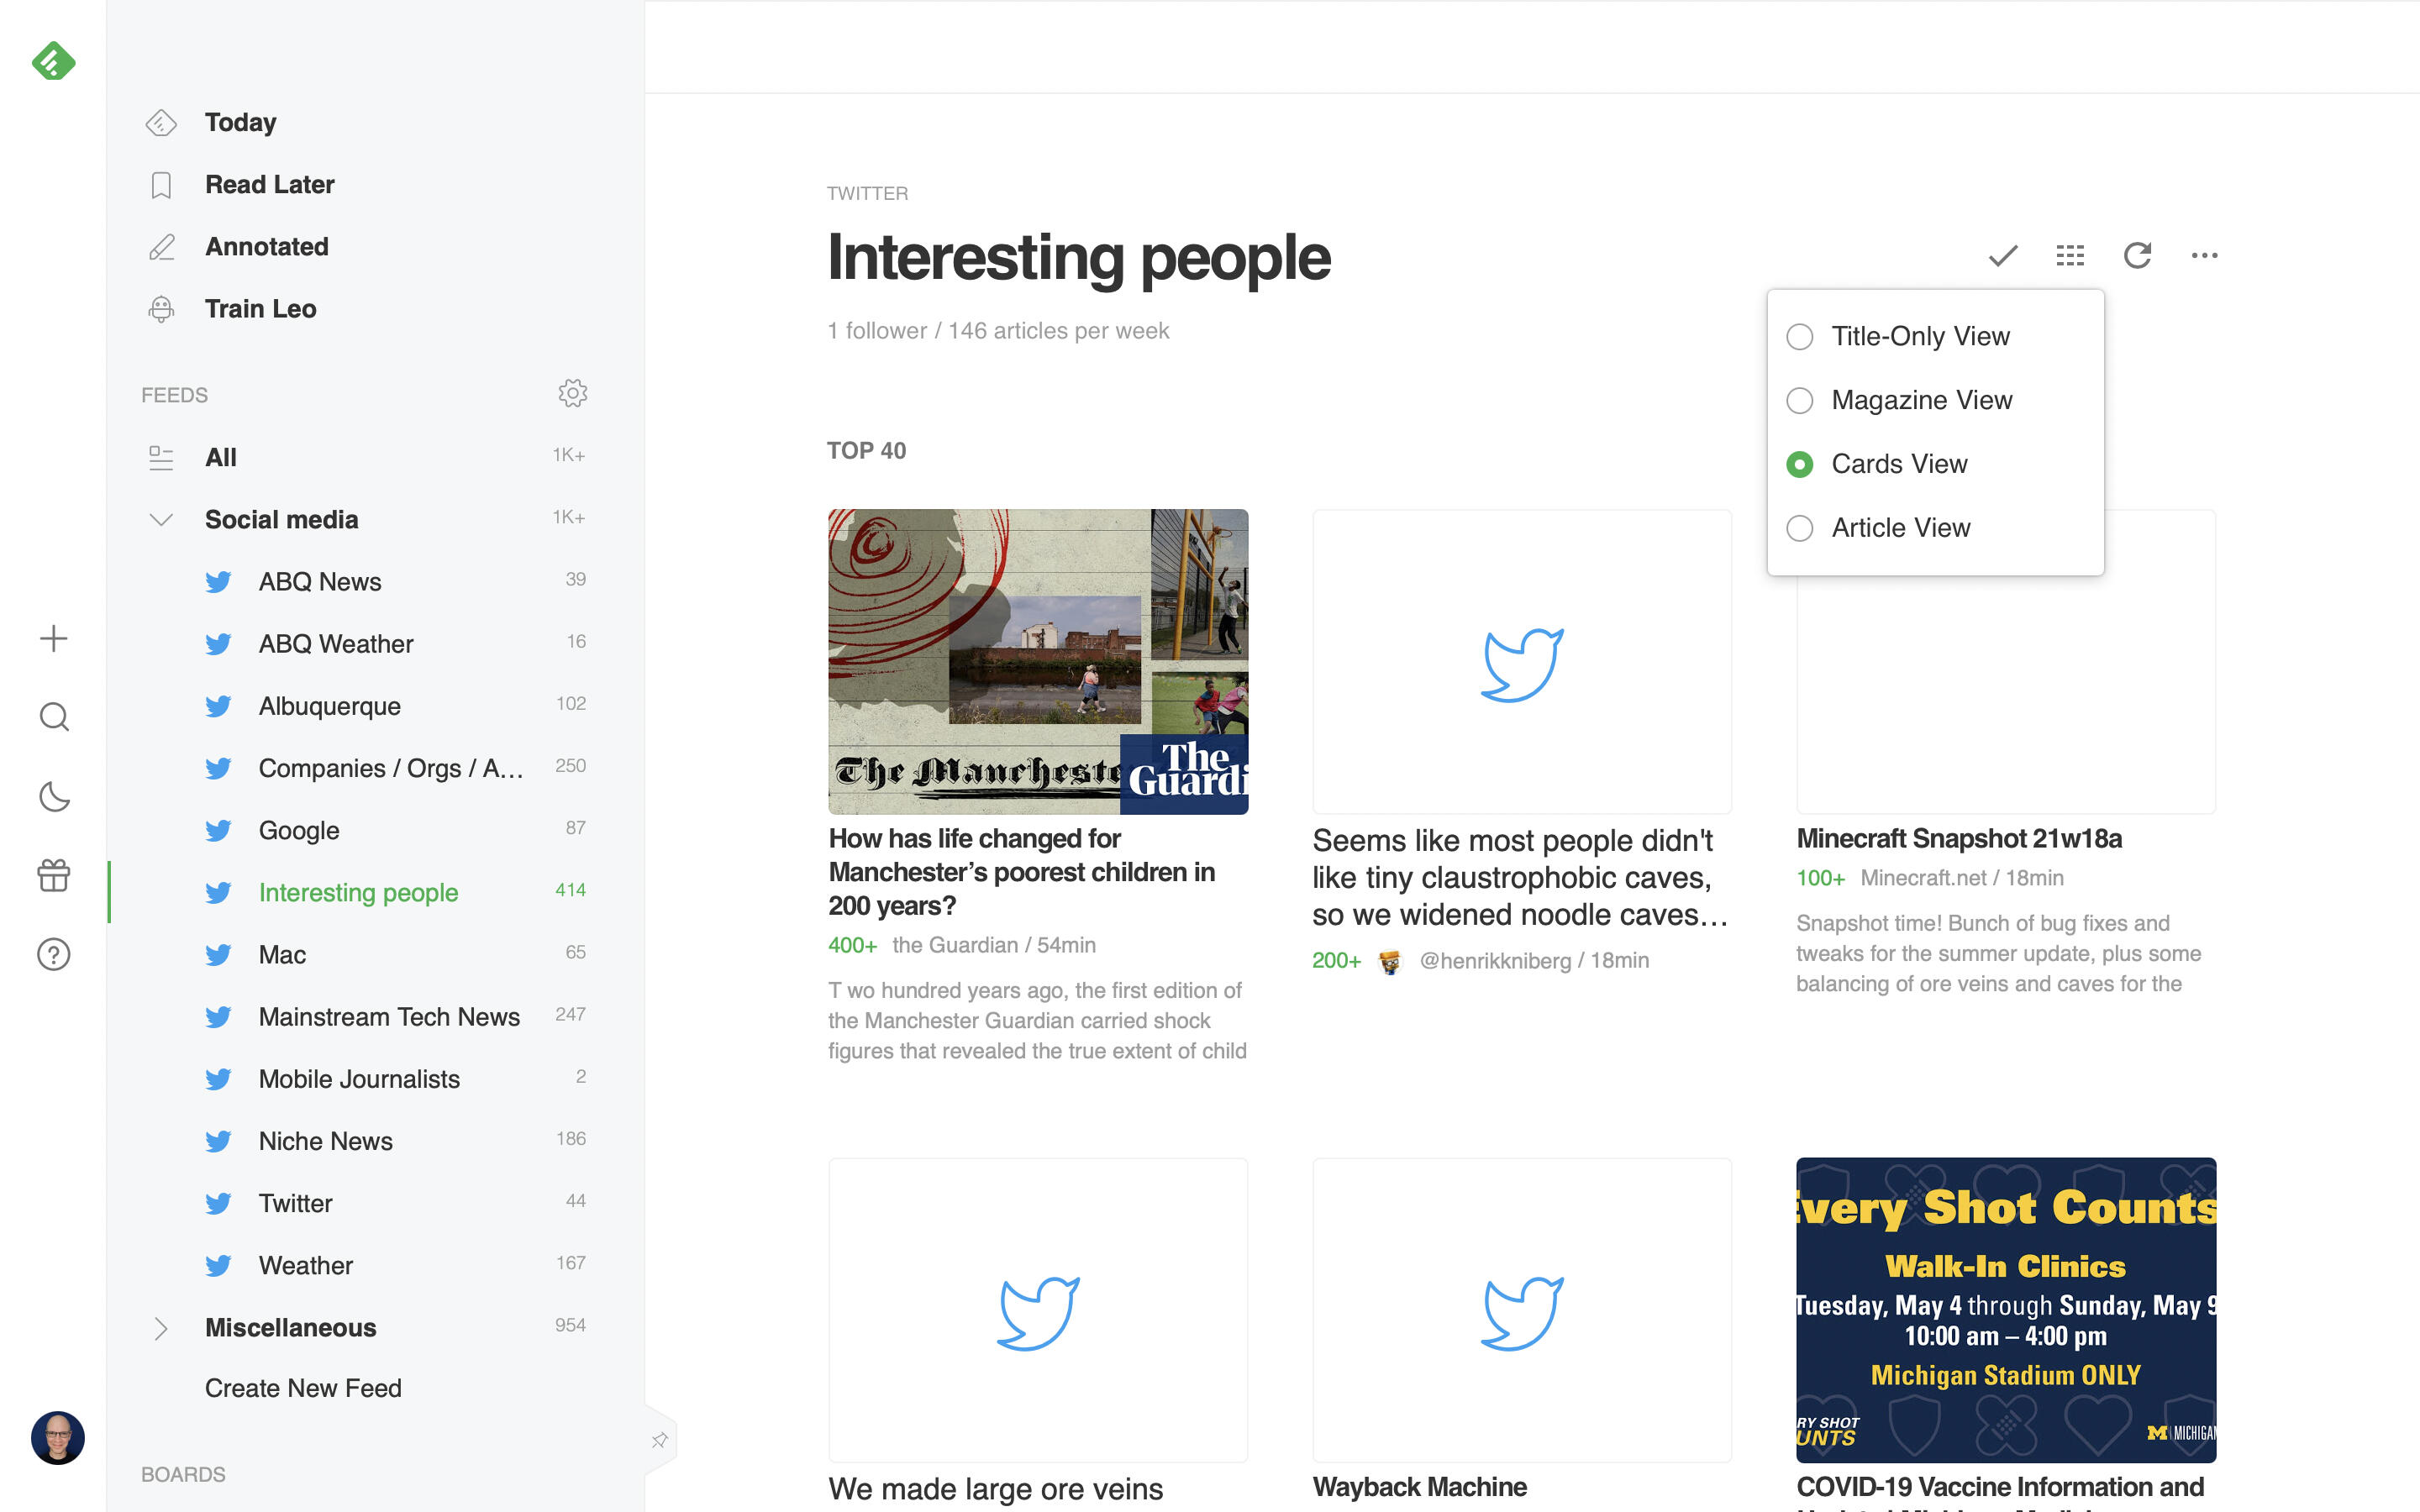 Screenshot of Feedly.com that displays 6 cards from Andy Wolber's Interesting people Twitter List. Display options menu shown with 4 options available: Title-only, Magazine, Cards, or Article views.